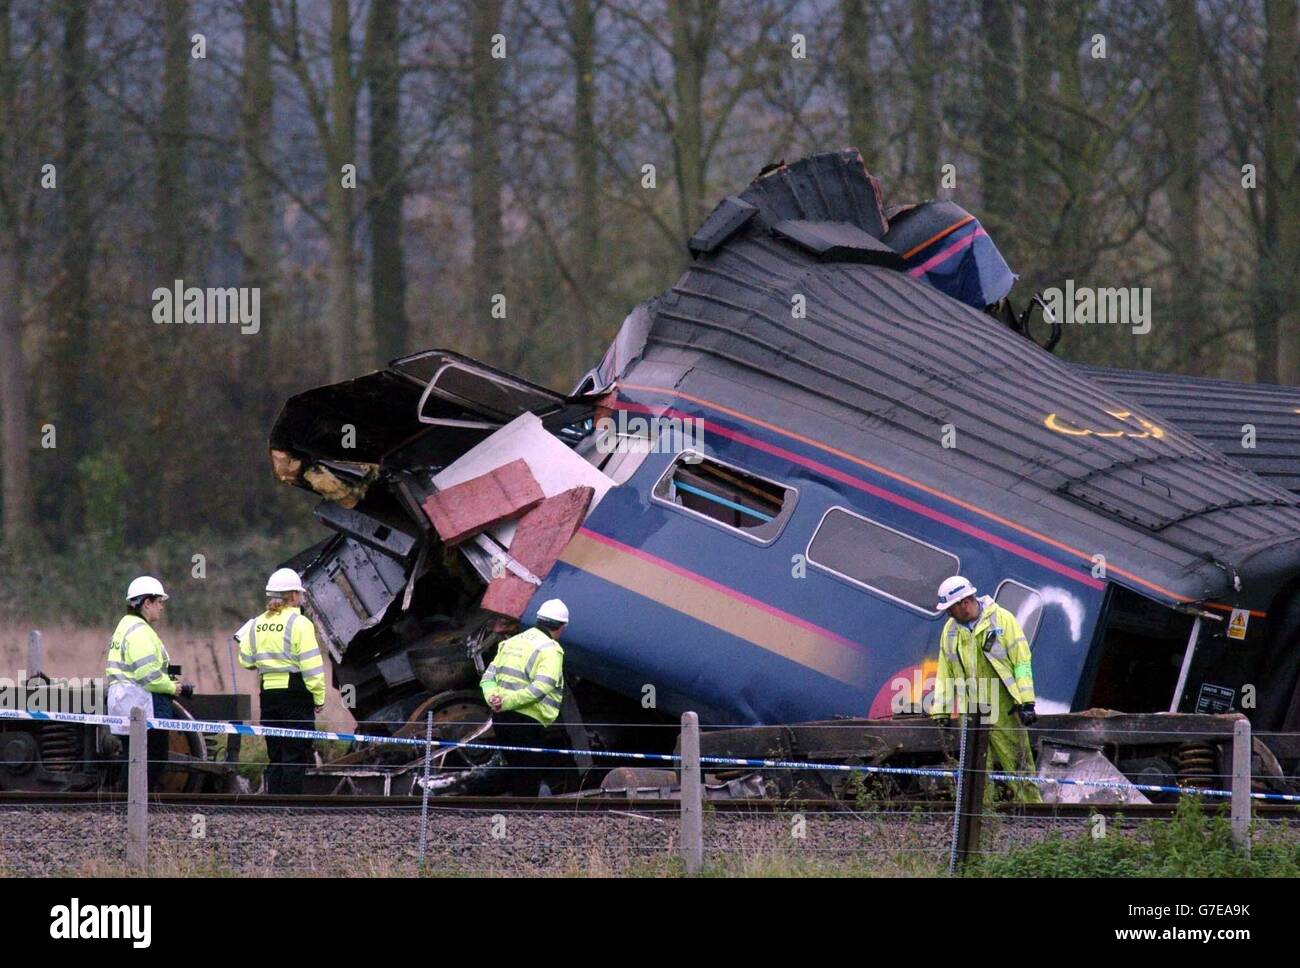 The mangled wreckage of one of the carriages of the train, which hit a saloon car on a remote level crossing near Ufton Nervet in Berkshire. Six people died in the impact and a seventh died in hospital. Police investigating the incident are focusing on why a motorist parked his car in the path of the train. All the bodies have now been removed from the site and a crane is being constructed to begin clearing the wreckage. Stock Photo